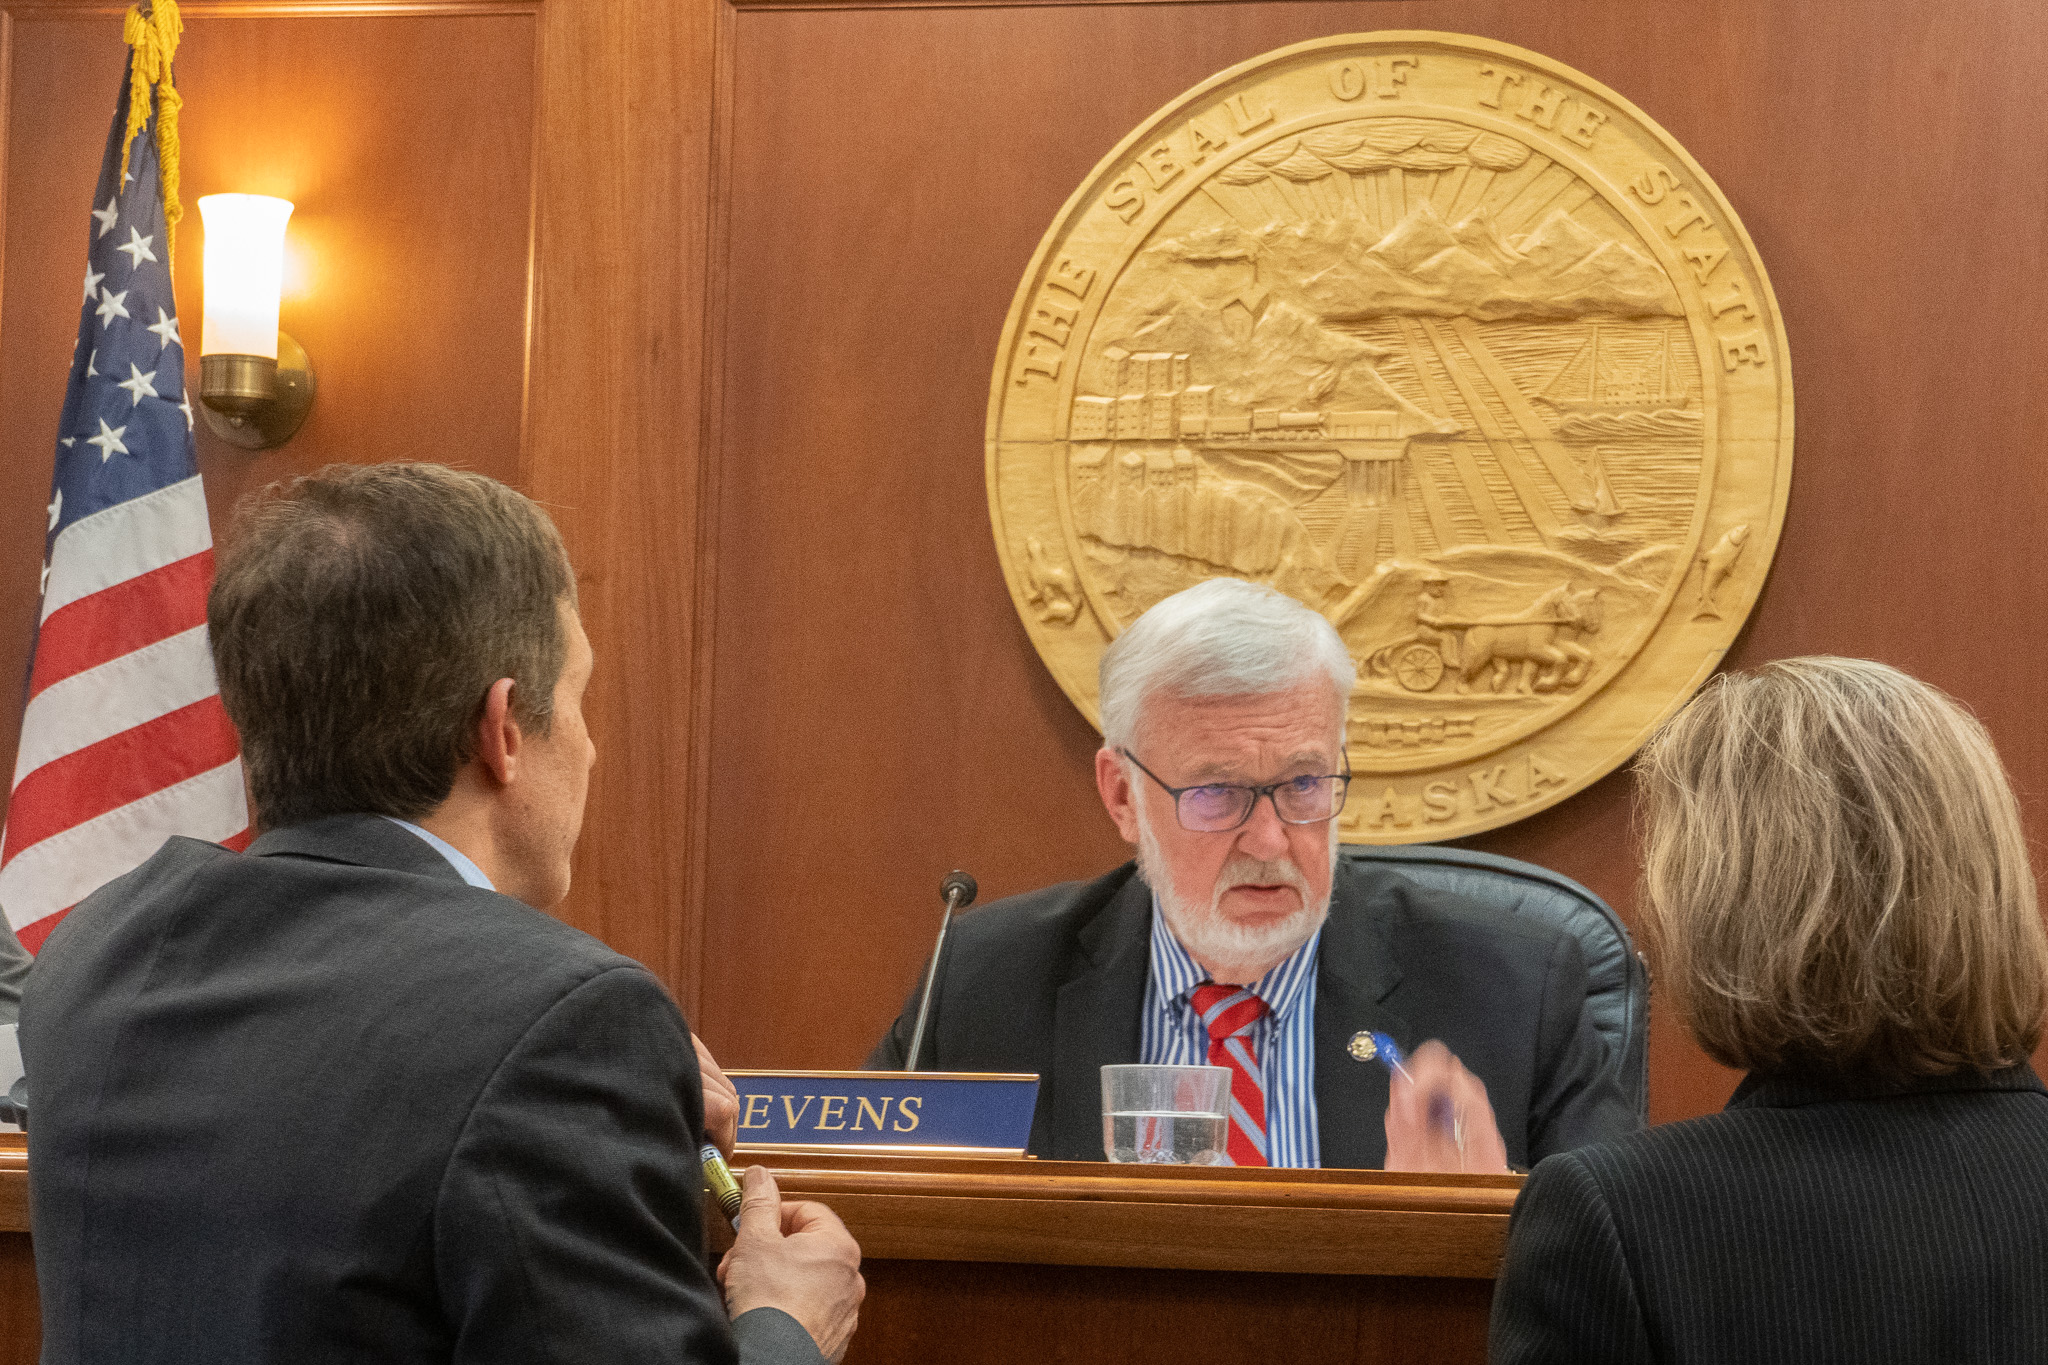 A white bearded man sits at a desk in front of a gold seal while two people talk to him.